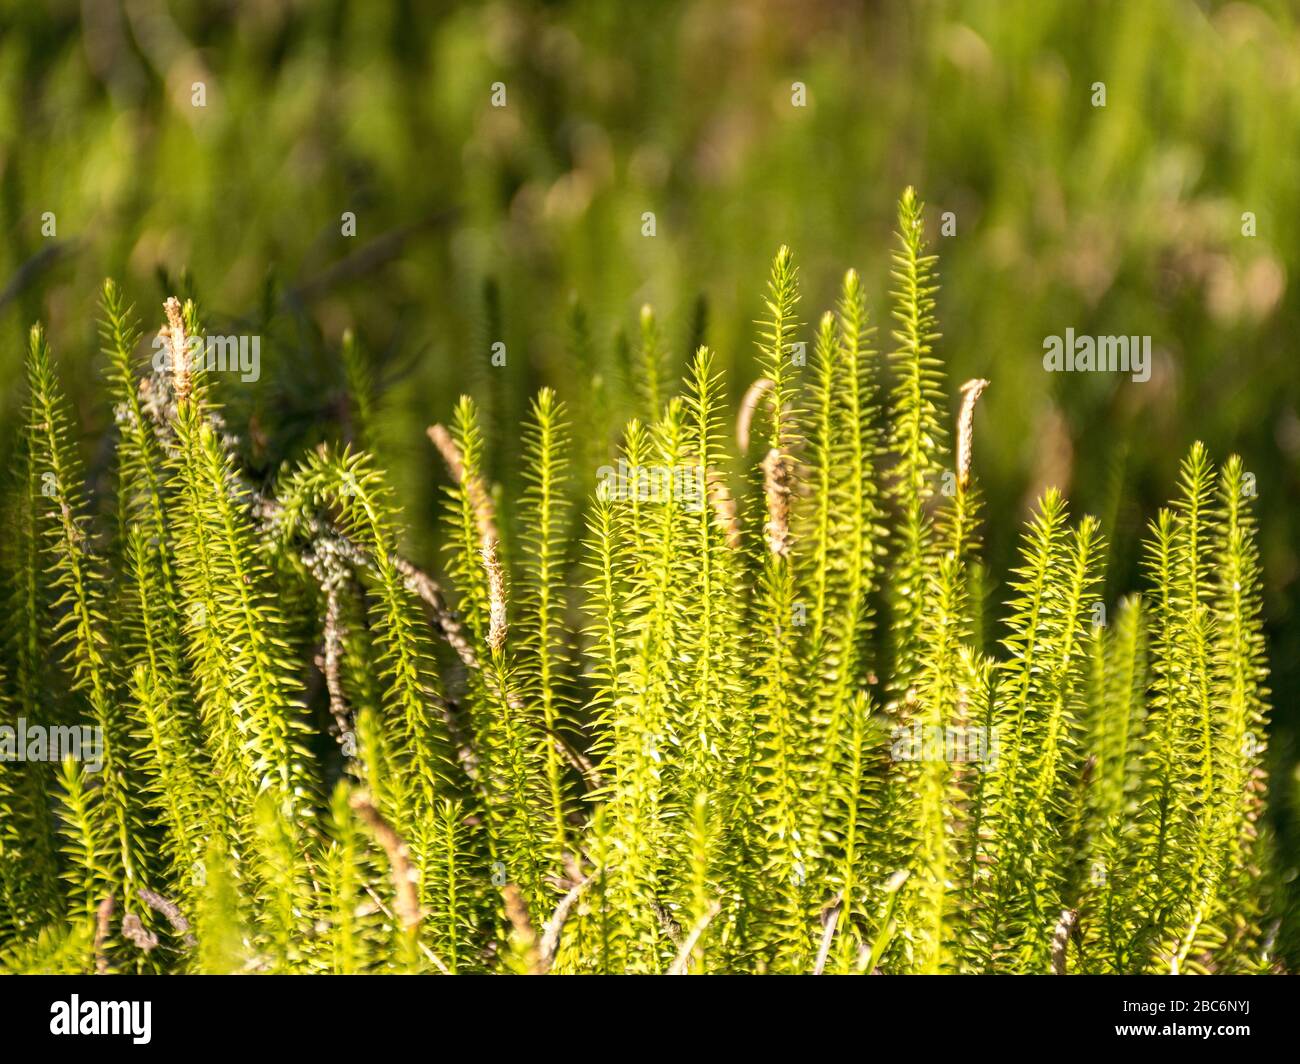 swamp grass texture, abstract background image Stock Photo - Alamy